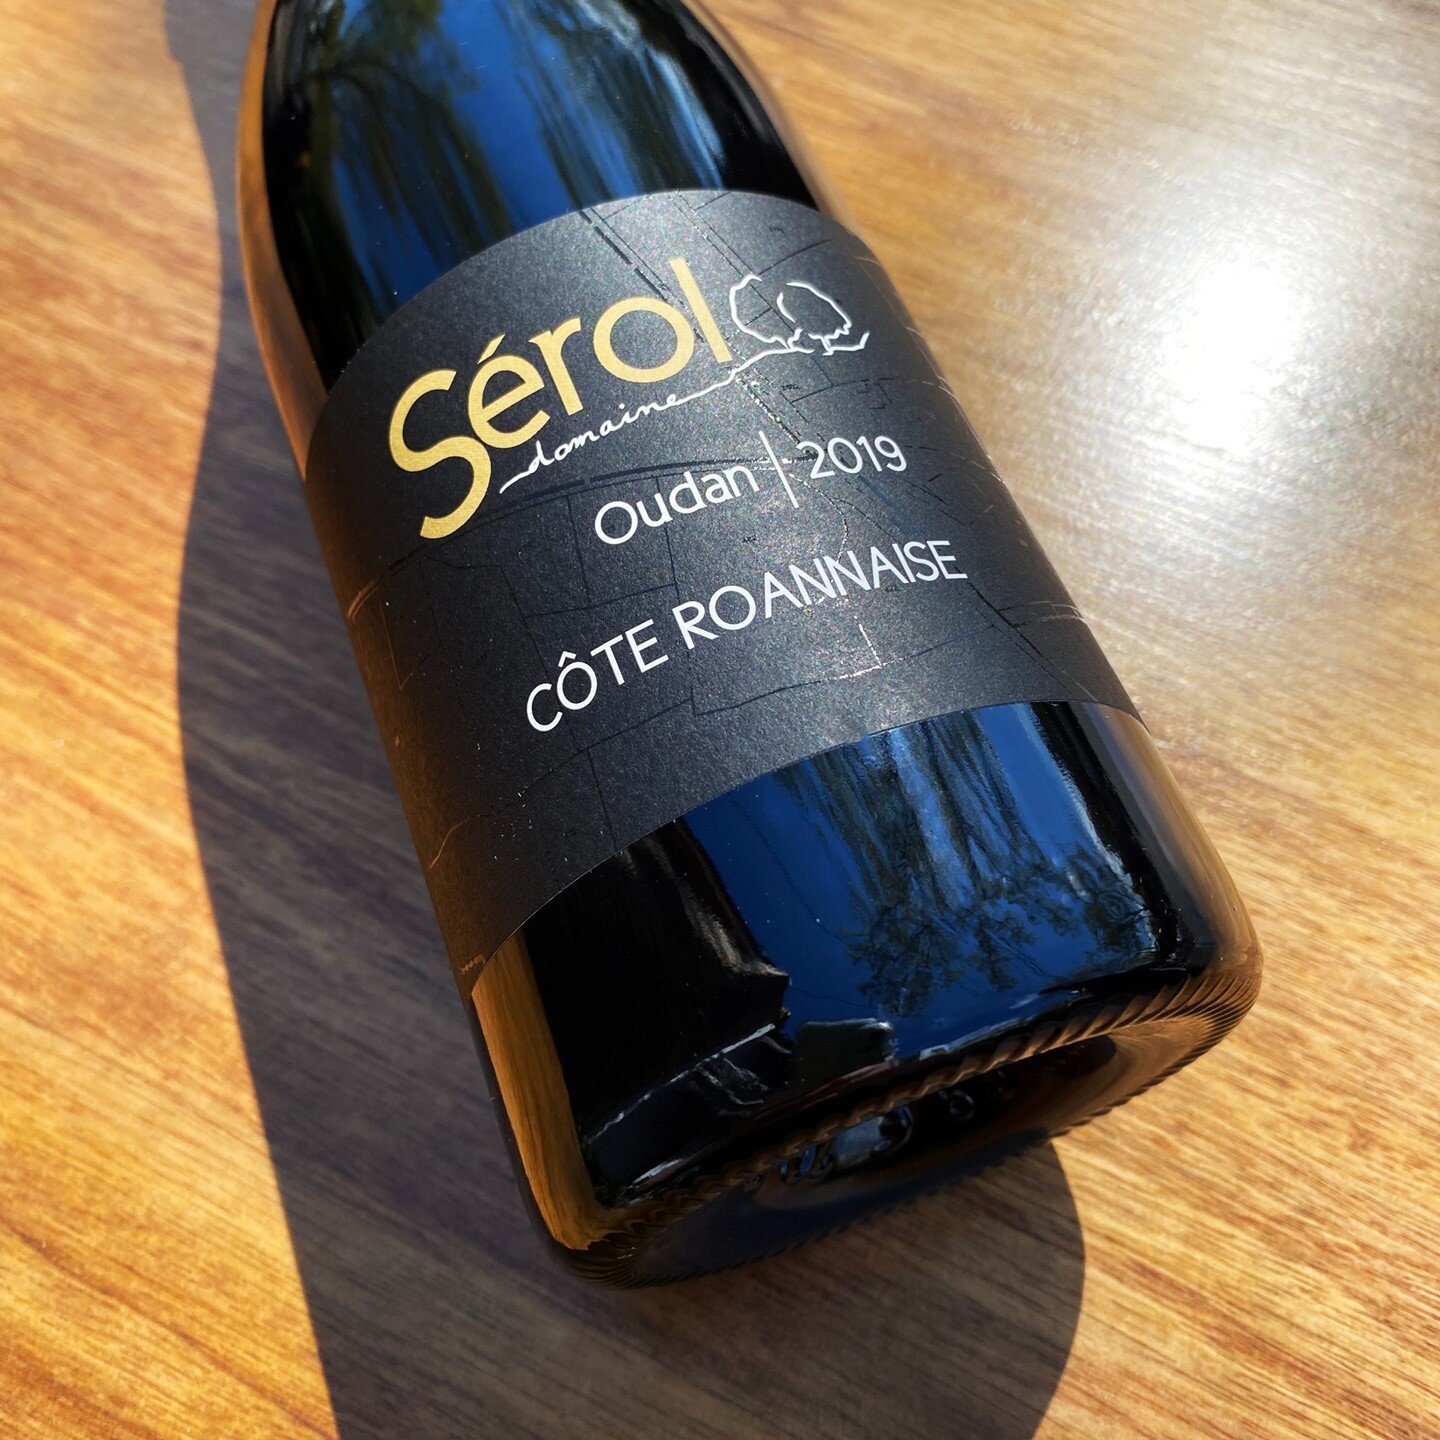 🇫🇷 New Release! 🇫🇷 ⁠
⁠
🍷 2019 Domaine S&eacute;rol &lsquo;Oudan&rsquo; C&ocirc;tes Roannaise AOP 🍷 ⁠
⁠
Certified organic &amp; biodynamic ❤️⁠
⁠
Planted by St&eacute;phane around 25 years ago, &lsquo;Oudan&rsquo; is a 2 hectare plot of pink gran